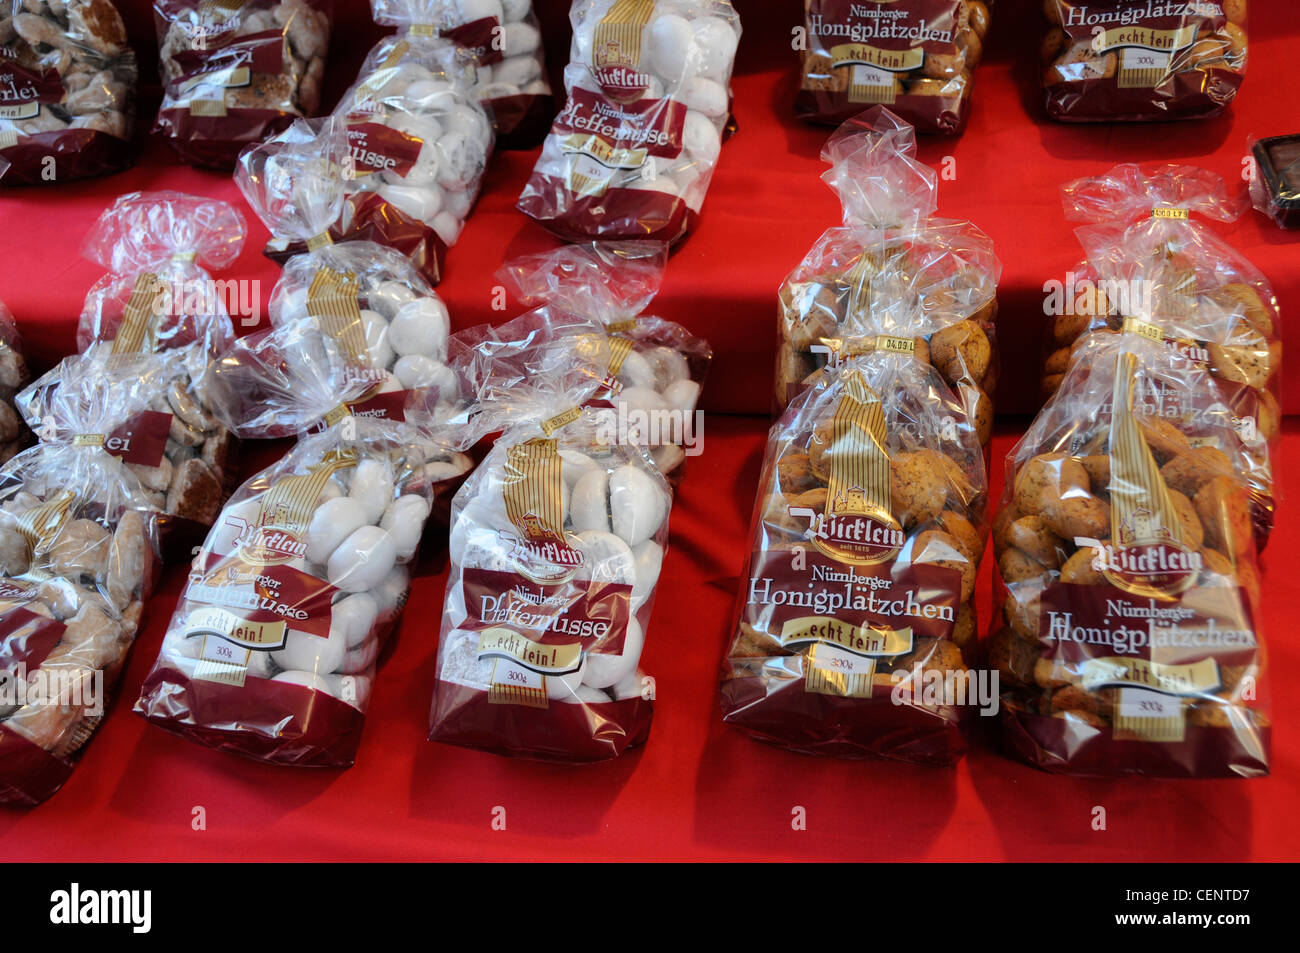 A display of gingerbread on a market stall in Nuremberg, Germany Stock Photo